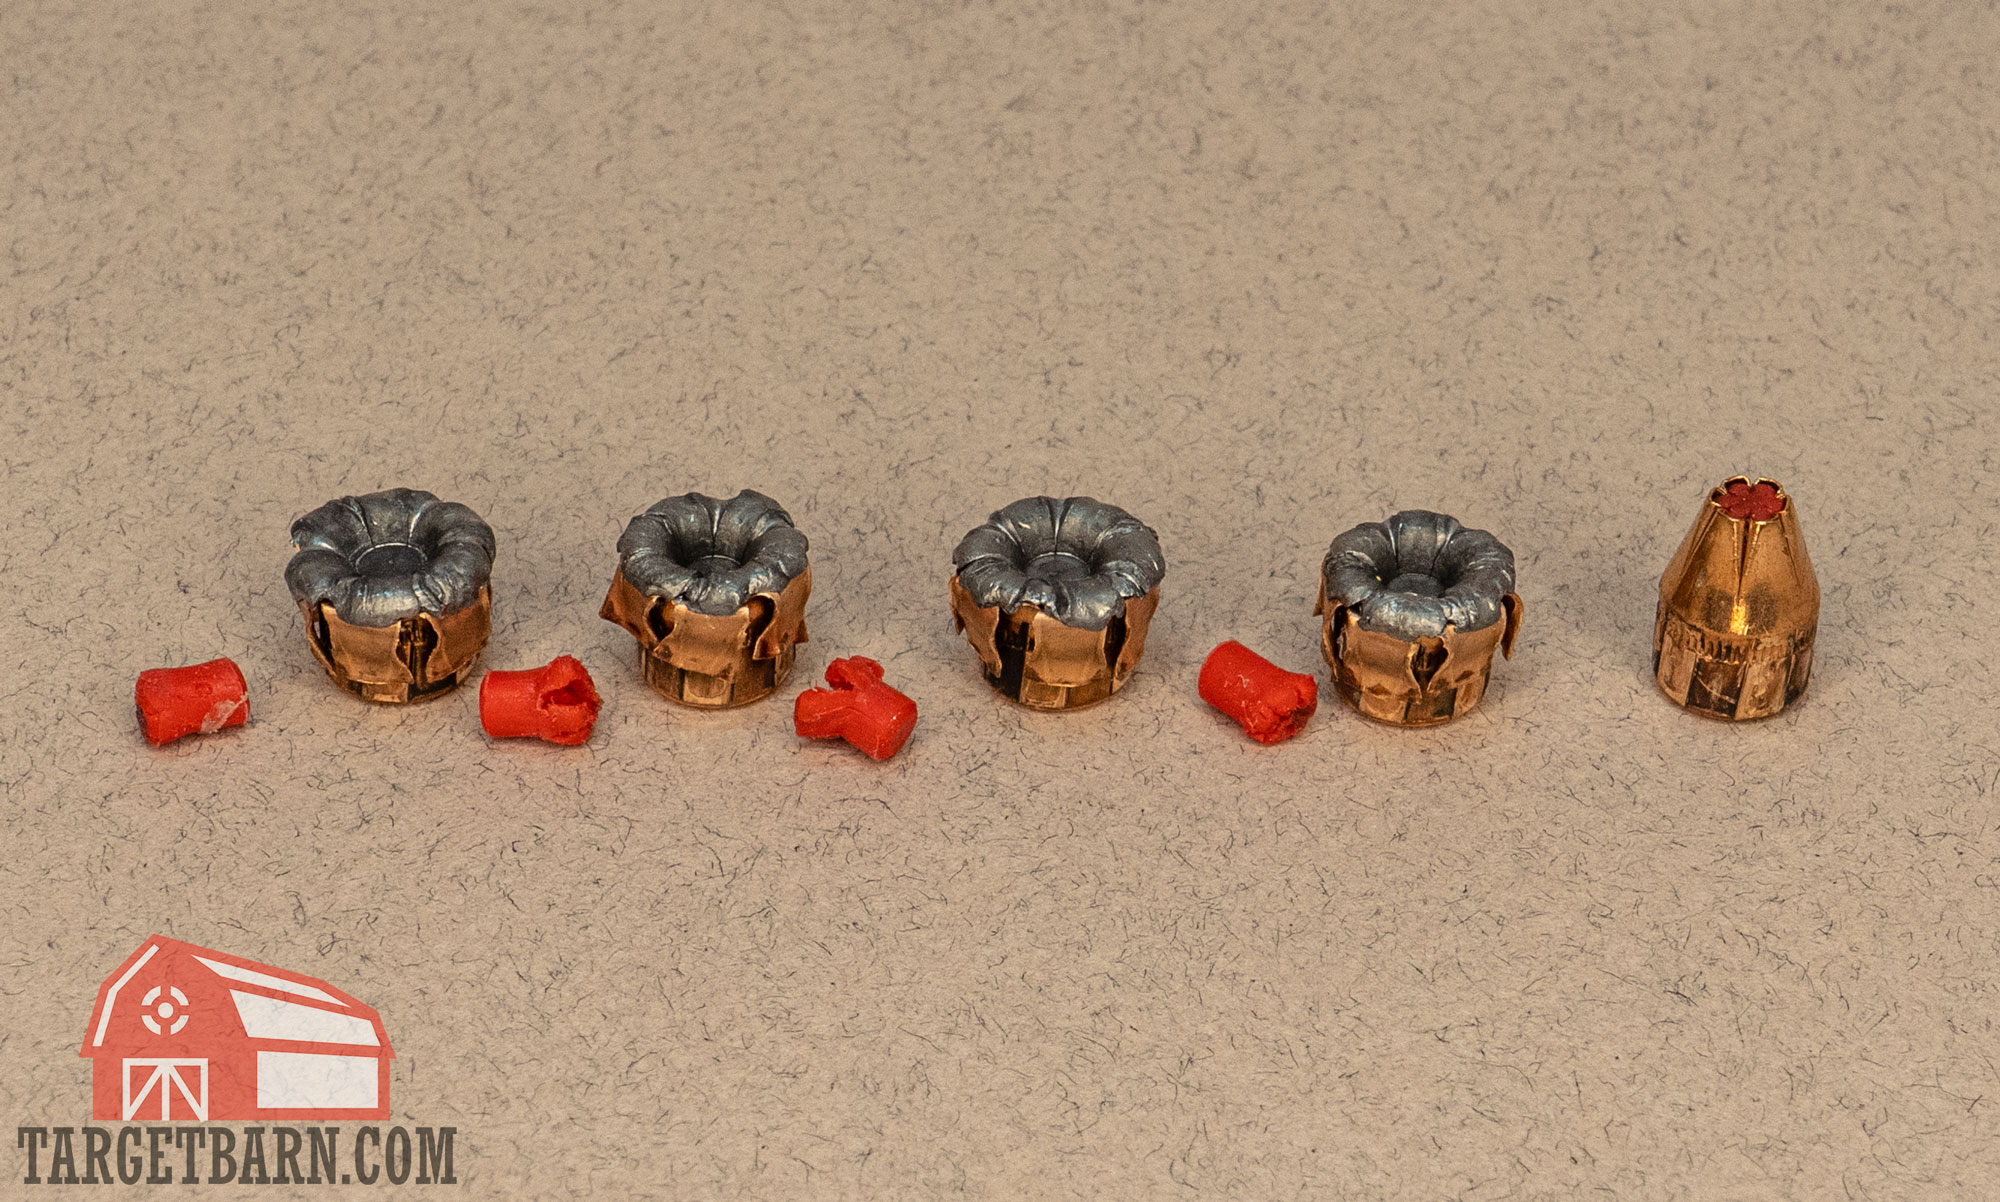 showing 5 expanded bullets of the hornady critical defense 380